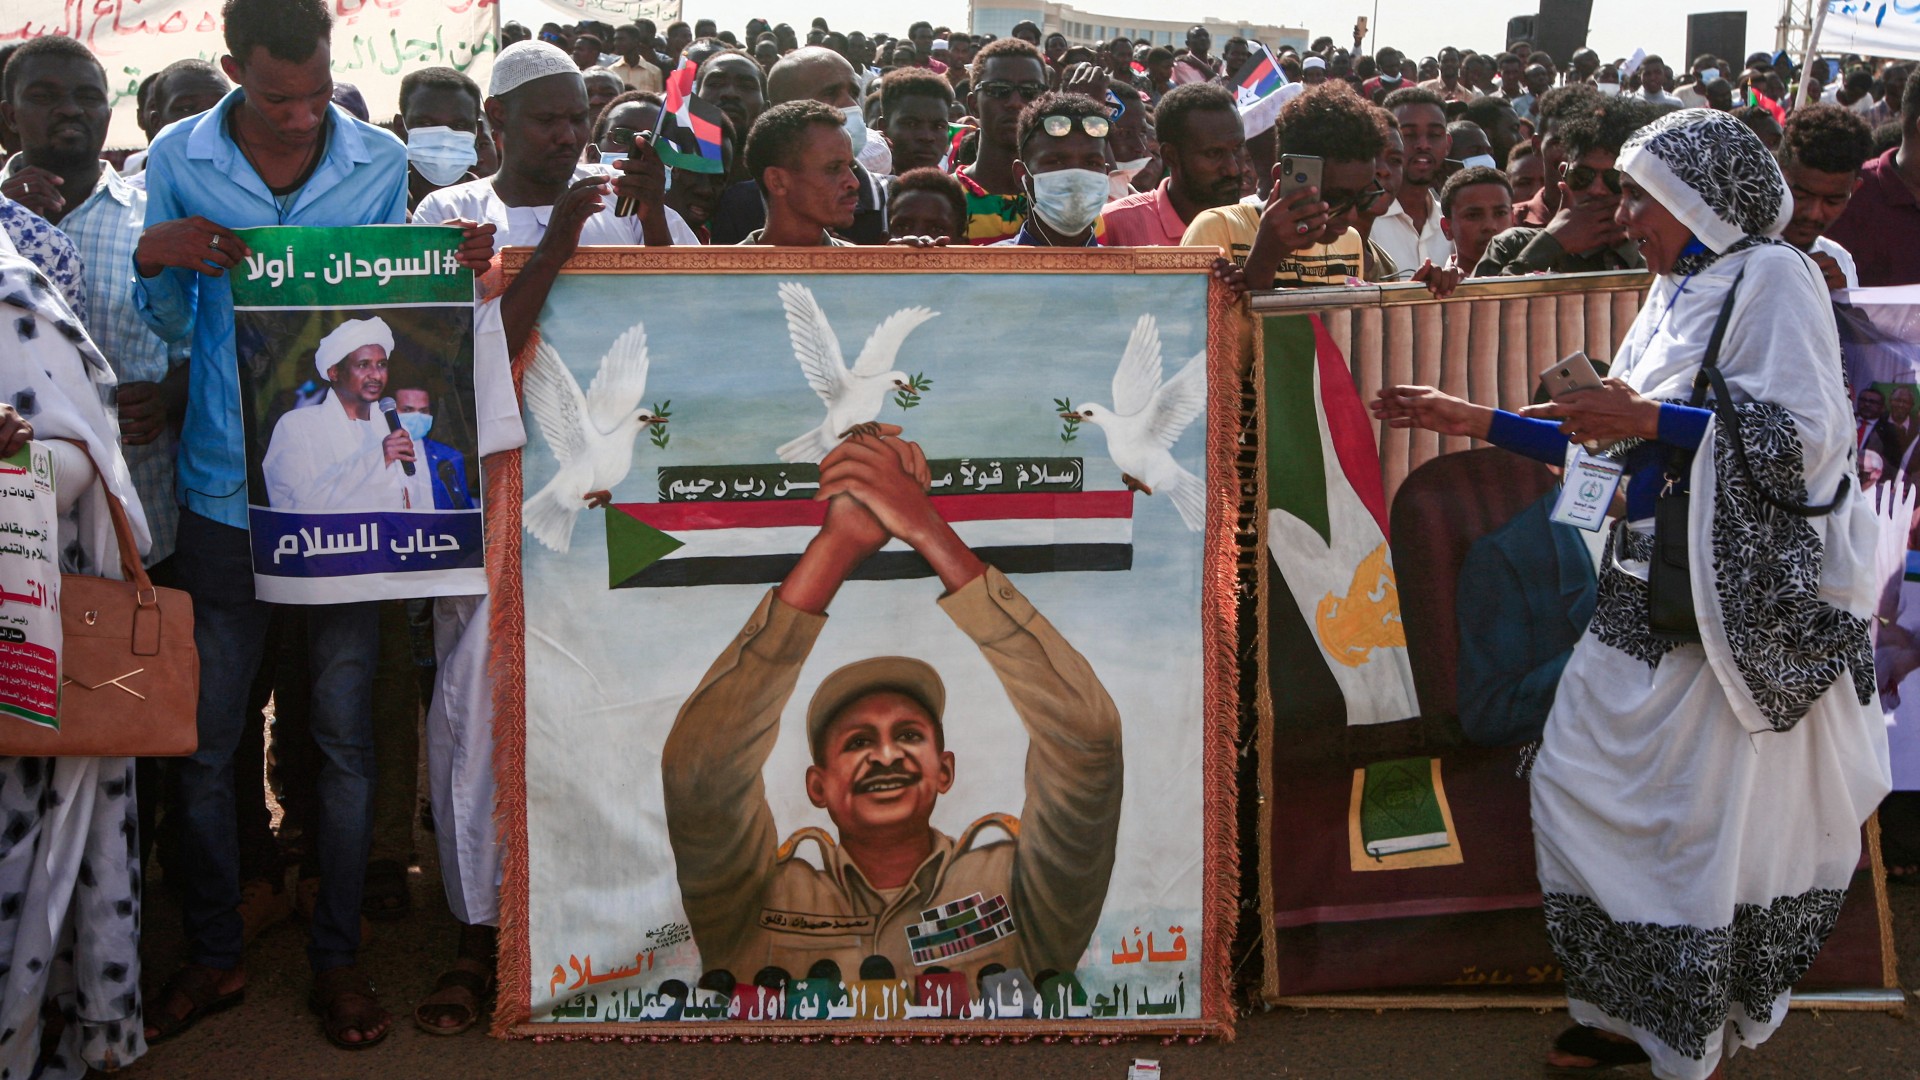 People stand holding signs showing Hemeti during a ceremony to sign a South Sudan peace accord in October 2020 (AFP)